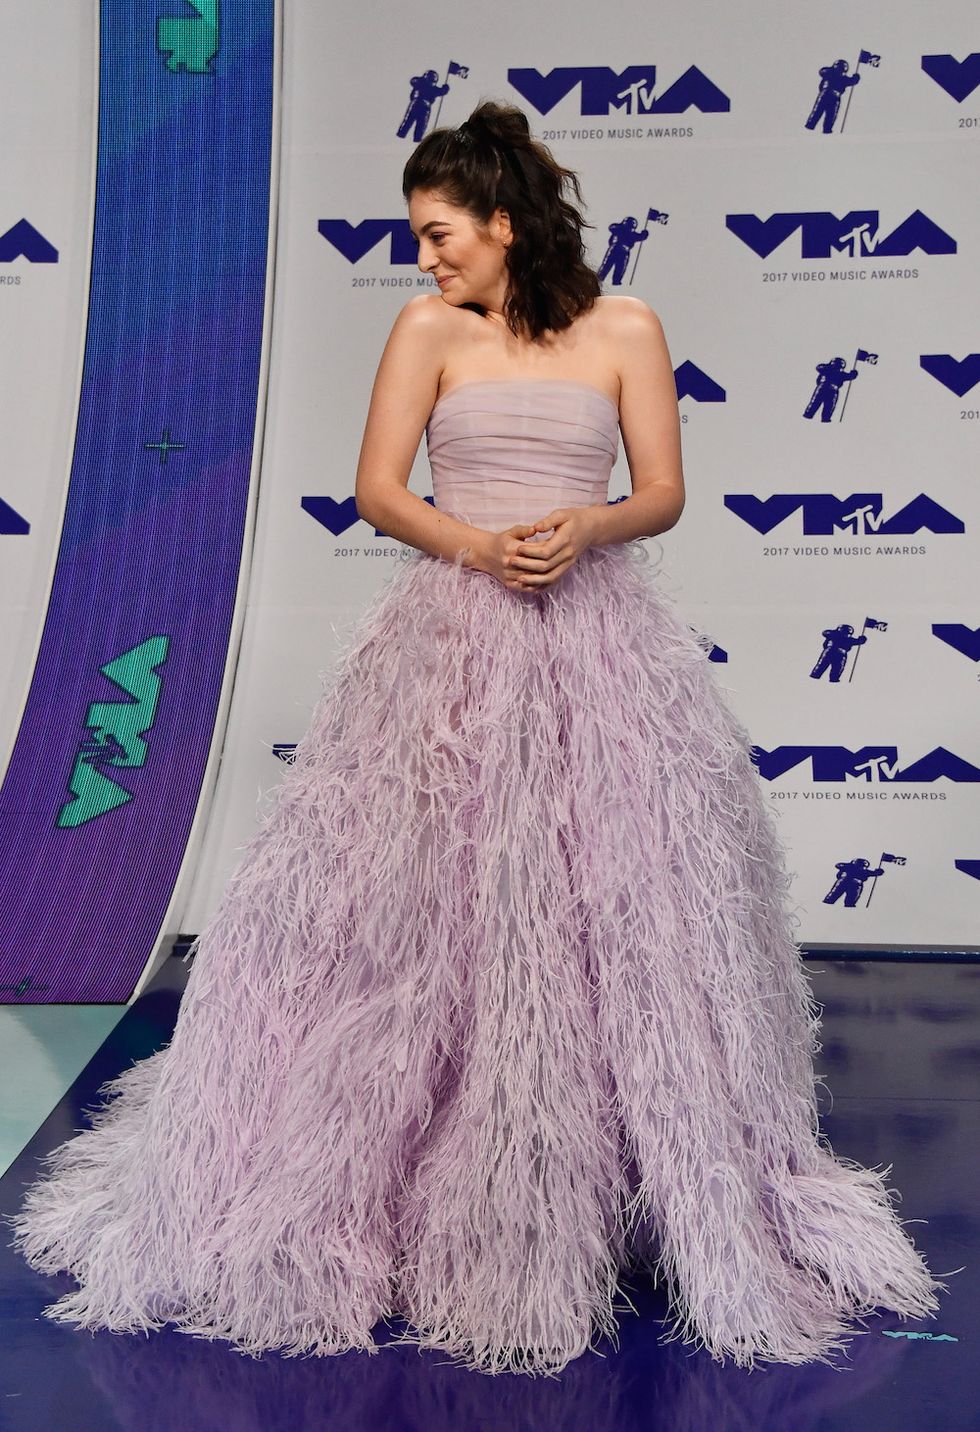 Lorde Dressed Like a Fairytale Princess Prom Queen for the 2017 VMAs ...